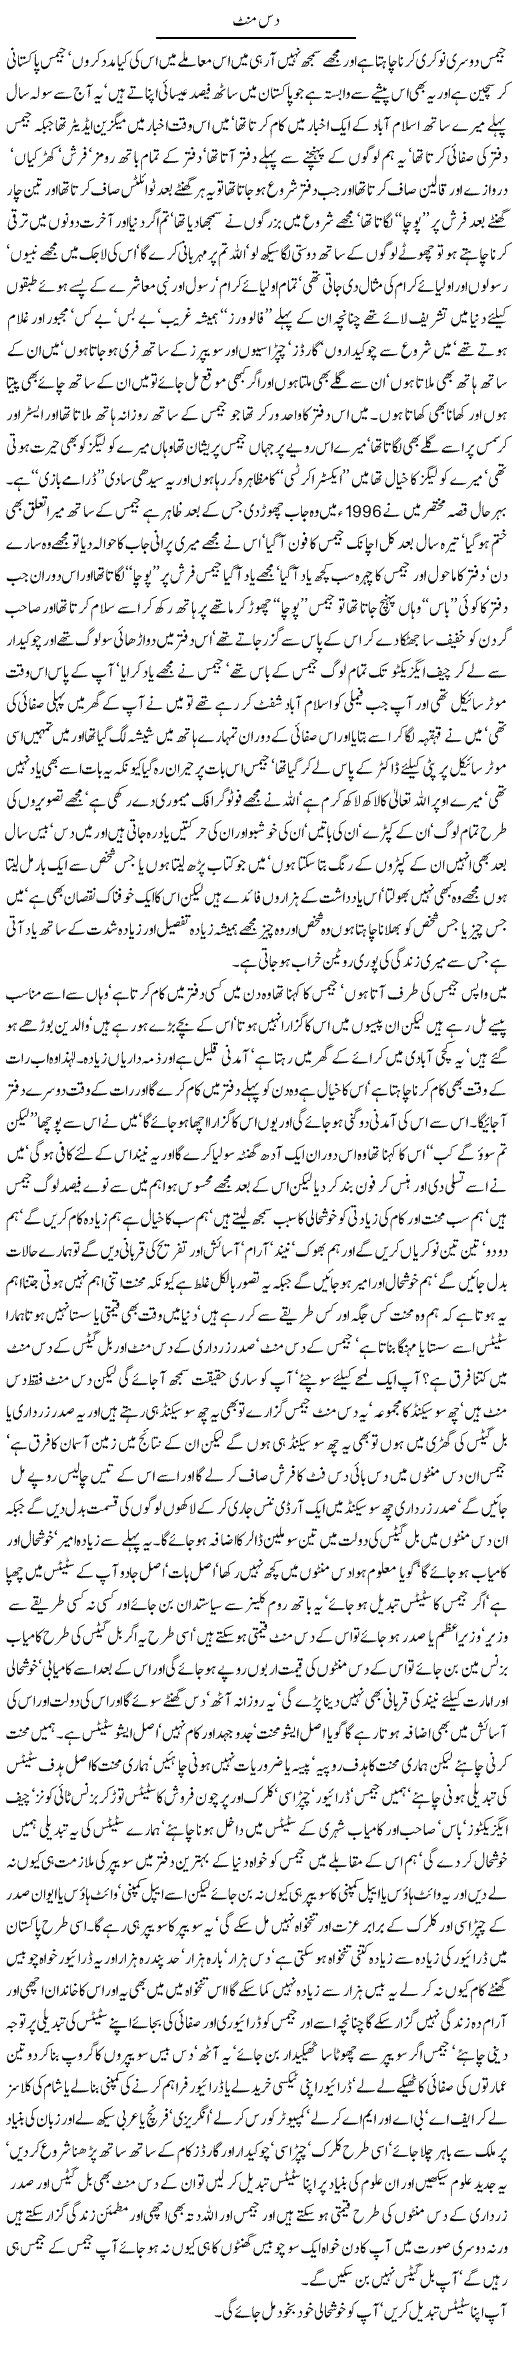 10 Minutes Express Column Javed Chaudhry 3 October 2010